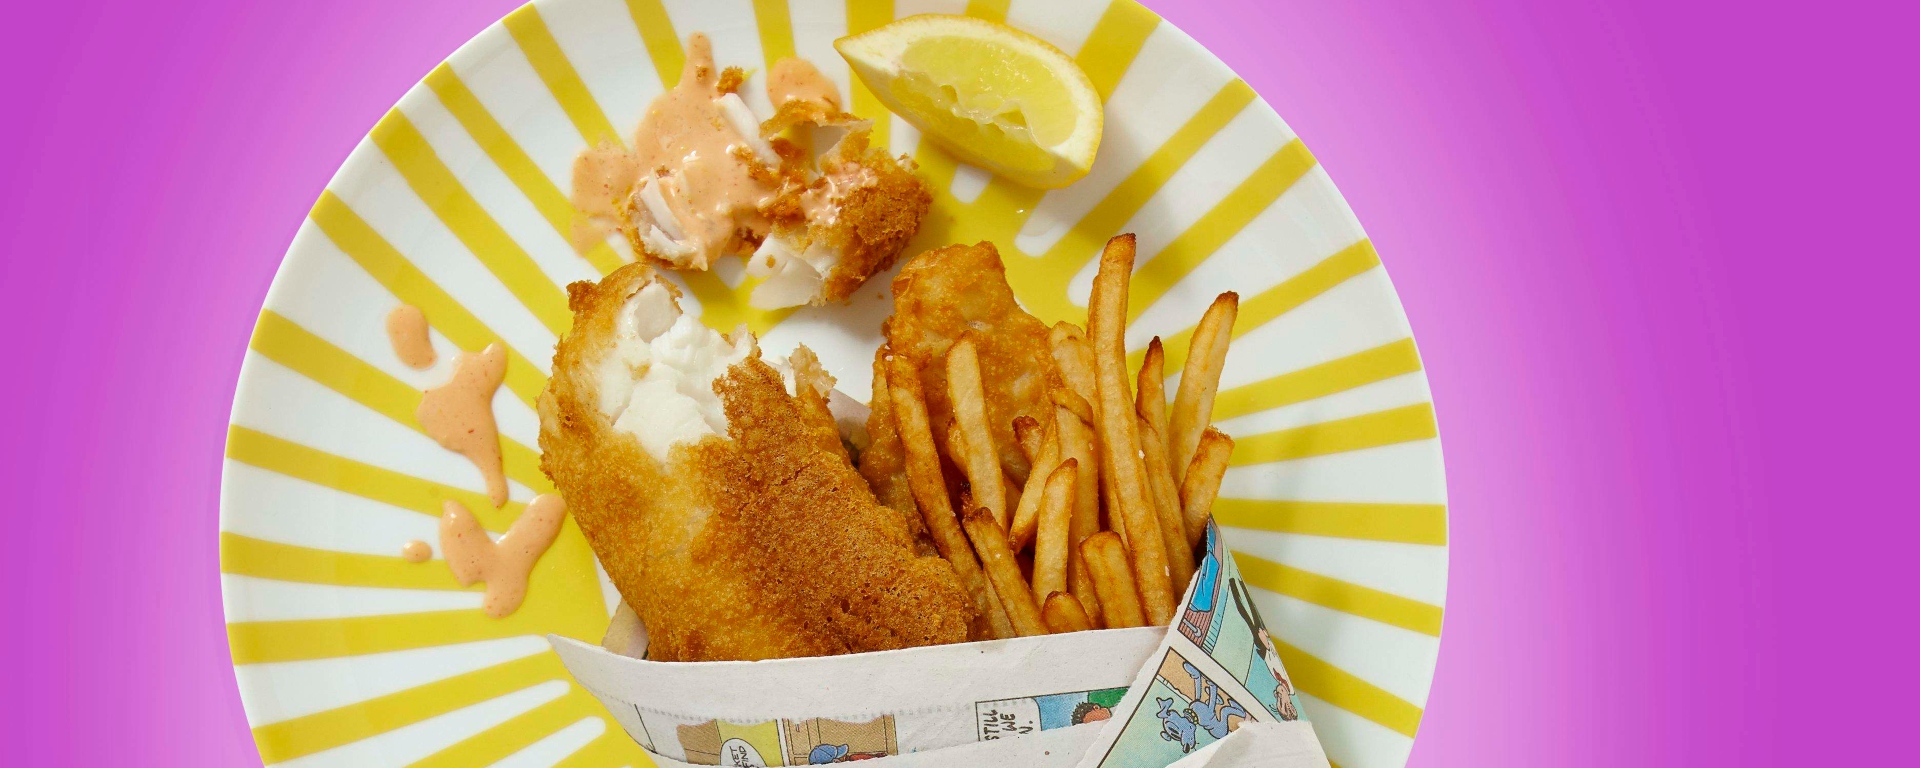 CHA! Battered Fish with Spicy Lemon Mayonnaise